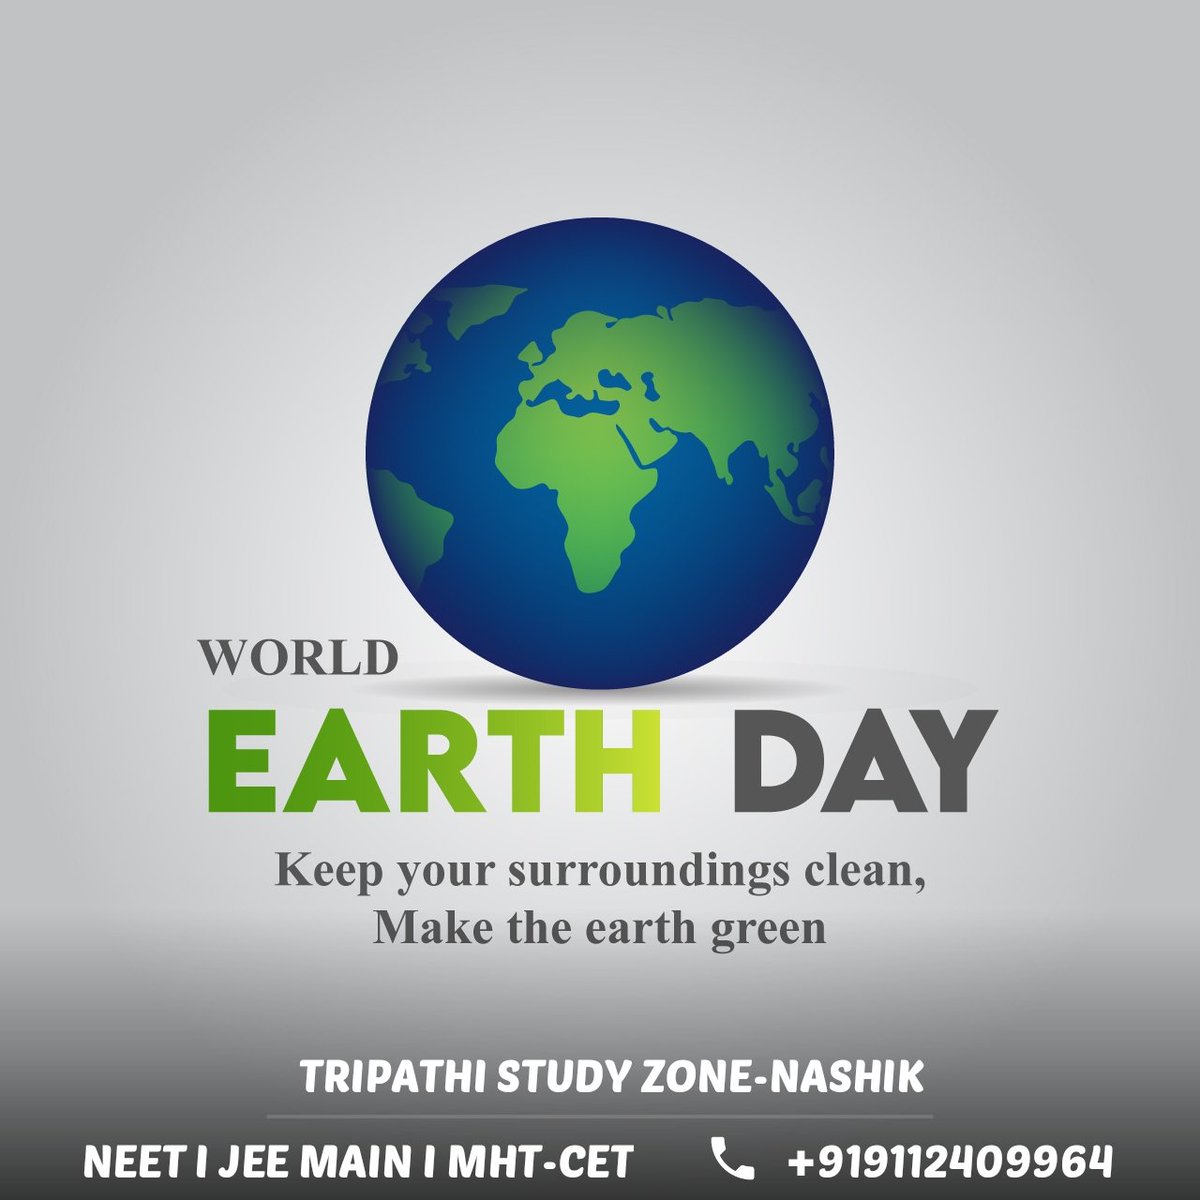 #WorldEarthDay #EarthDay2021 #SustainableLiving #ClimateAction #ProtectOurPlanet #GoGreen #EcoFriendly #SaveTheEarth #EnvironmentalAwareness #GreenLiving #SustainabilityMatters #MotherEarth #CleanEnergy #RenewableResources #ReduceReuseRecycle #EcoWarrior #NatureLover